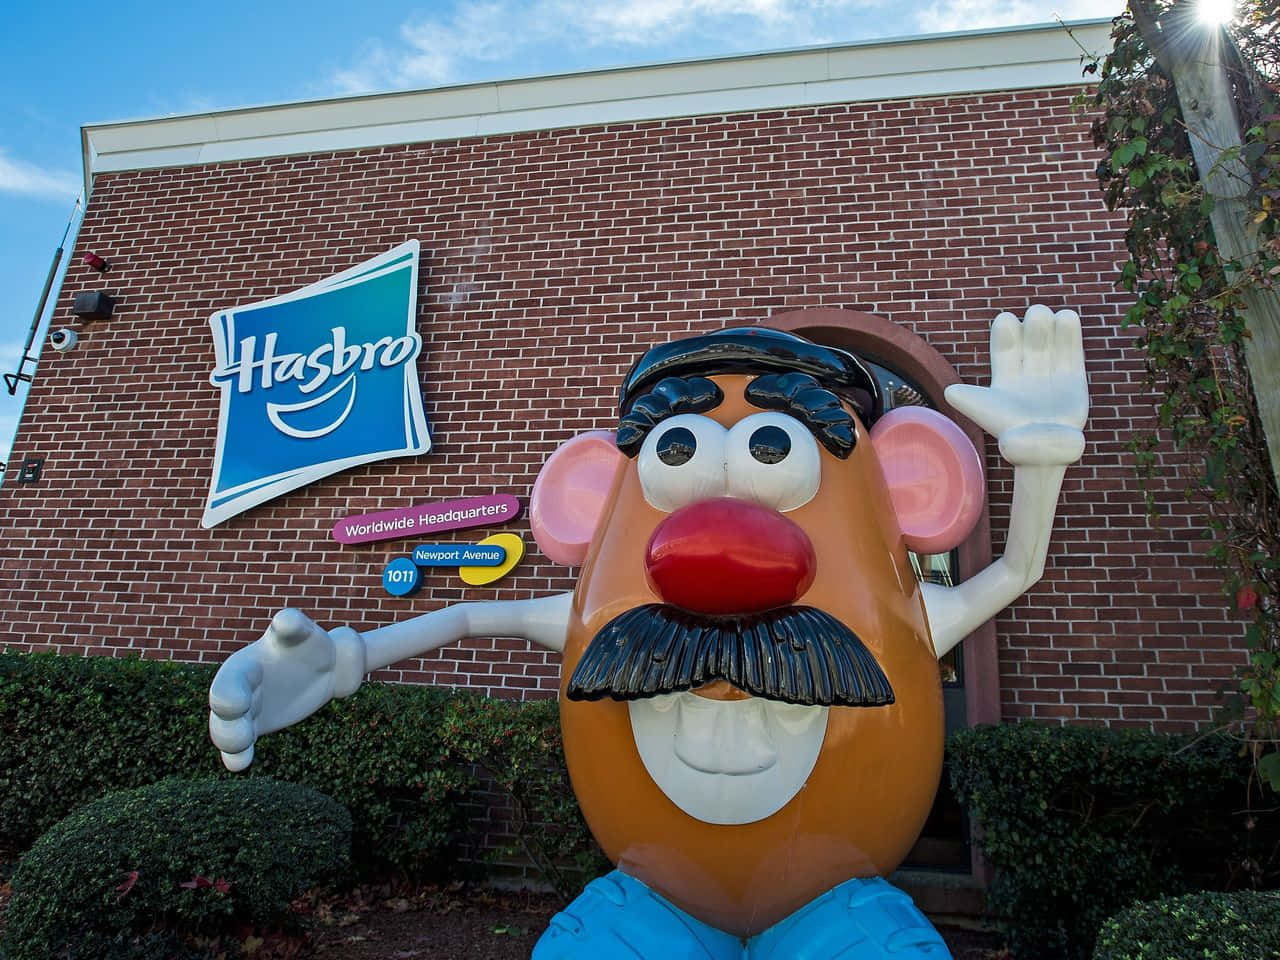 A Statue Of A Potato With A Mustache In Front Of A Building